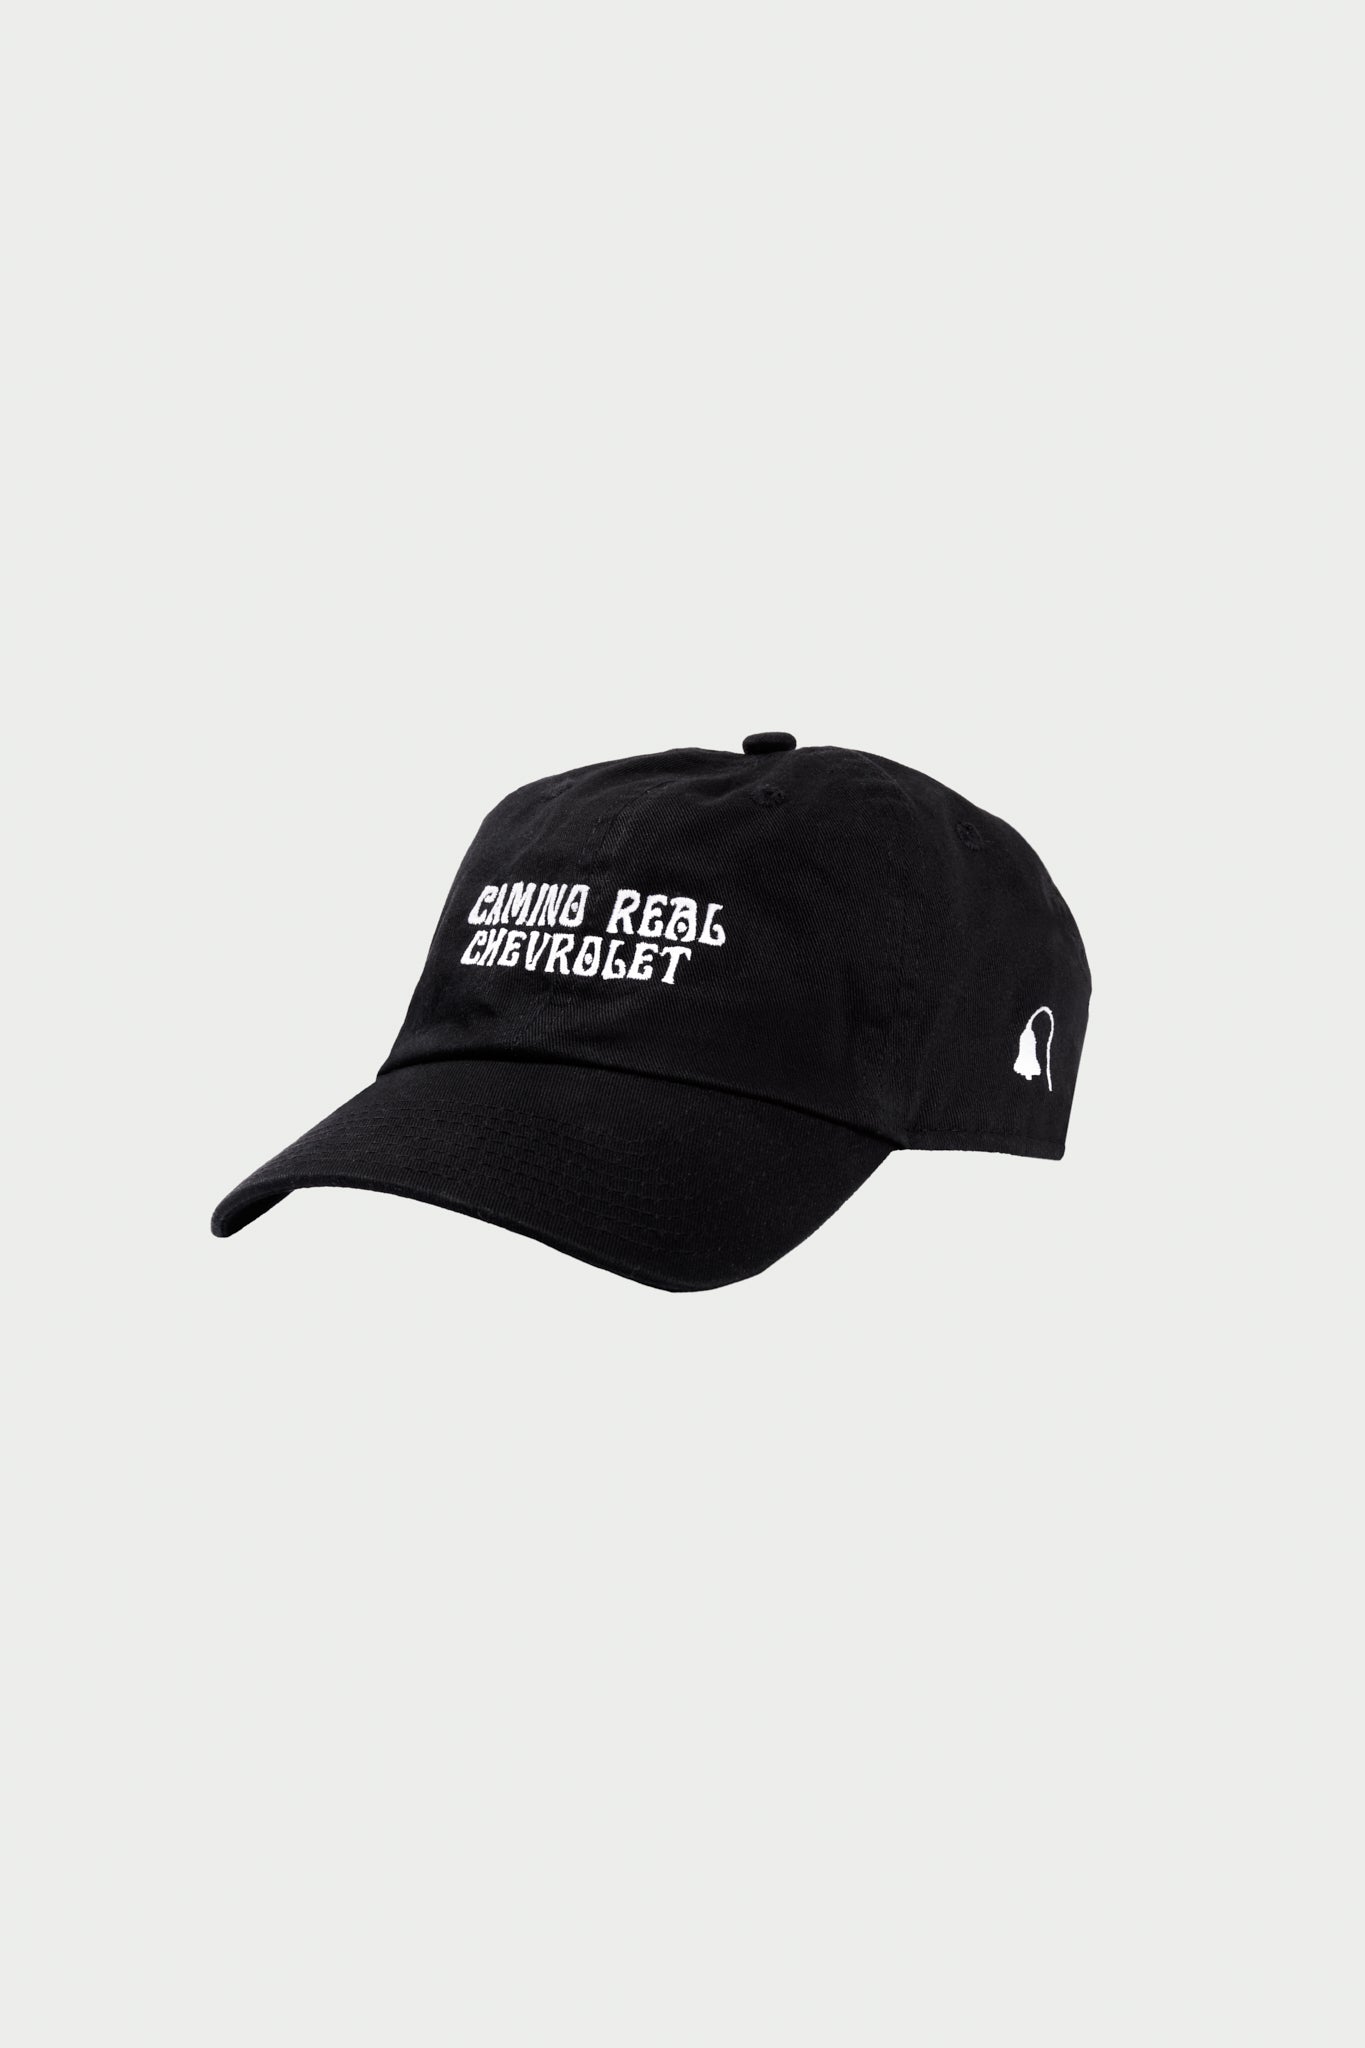 CLASSIC CAMINO REAL CHEVY DAD HAT (Black)